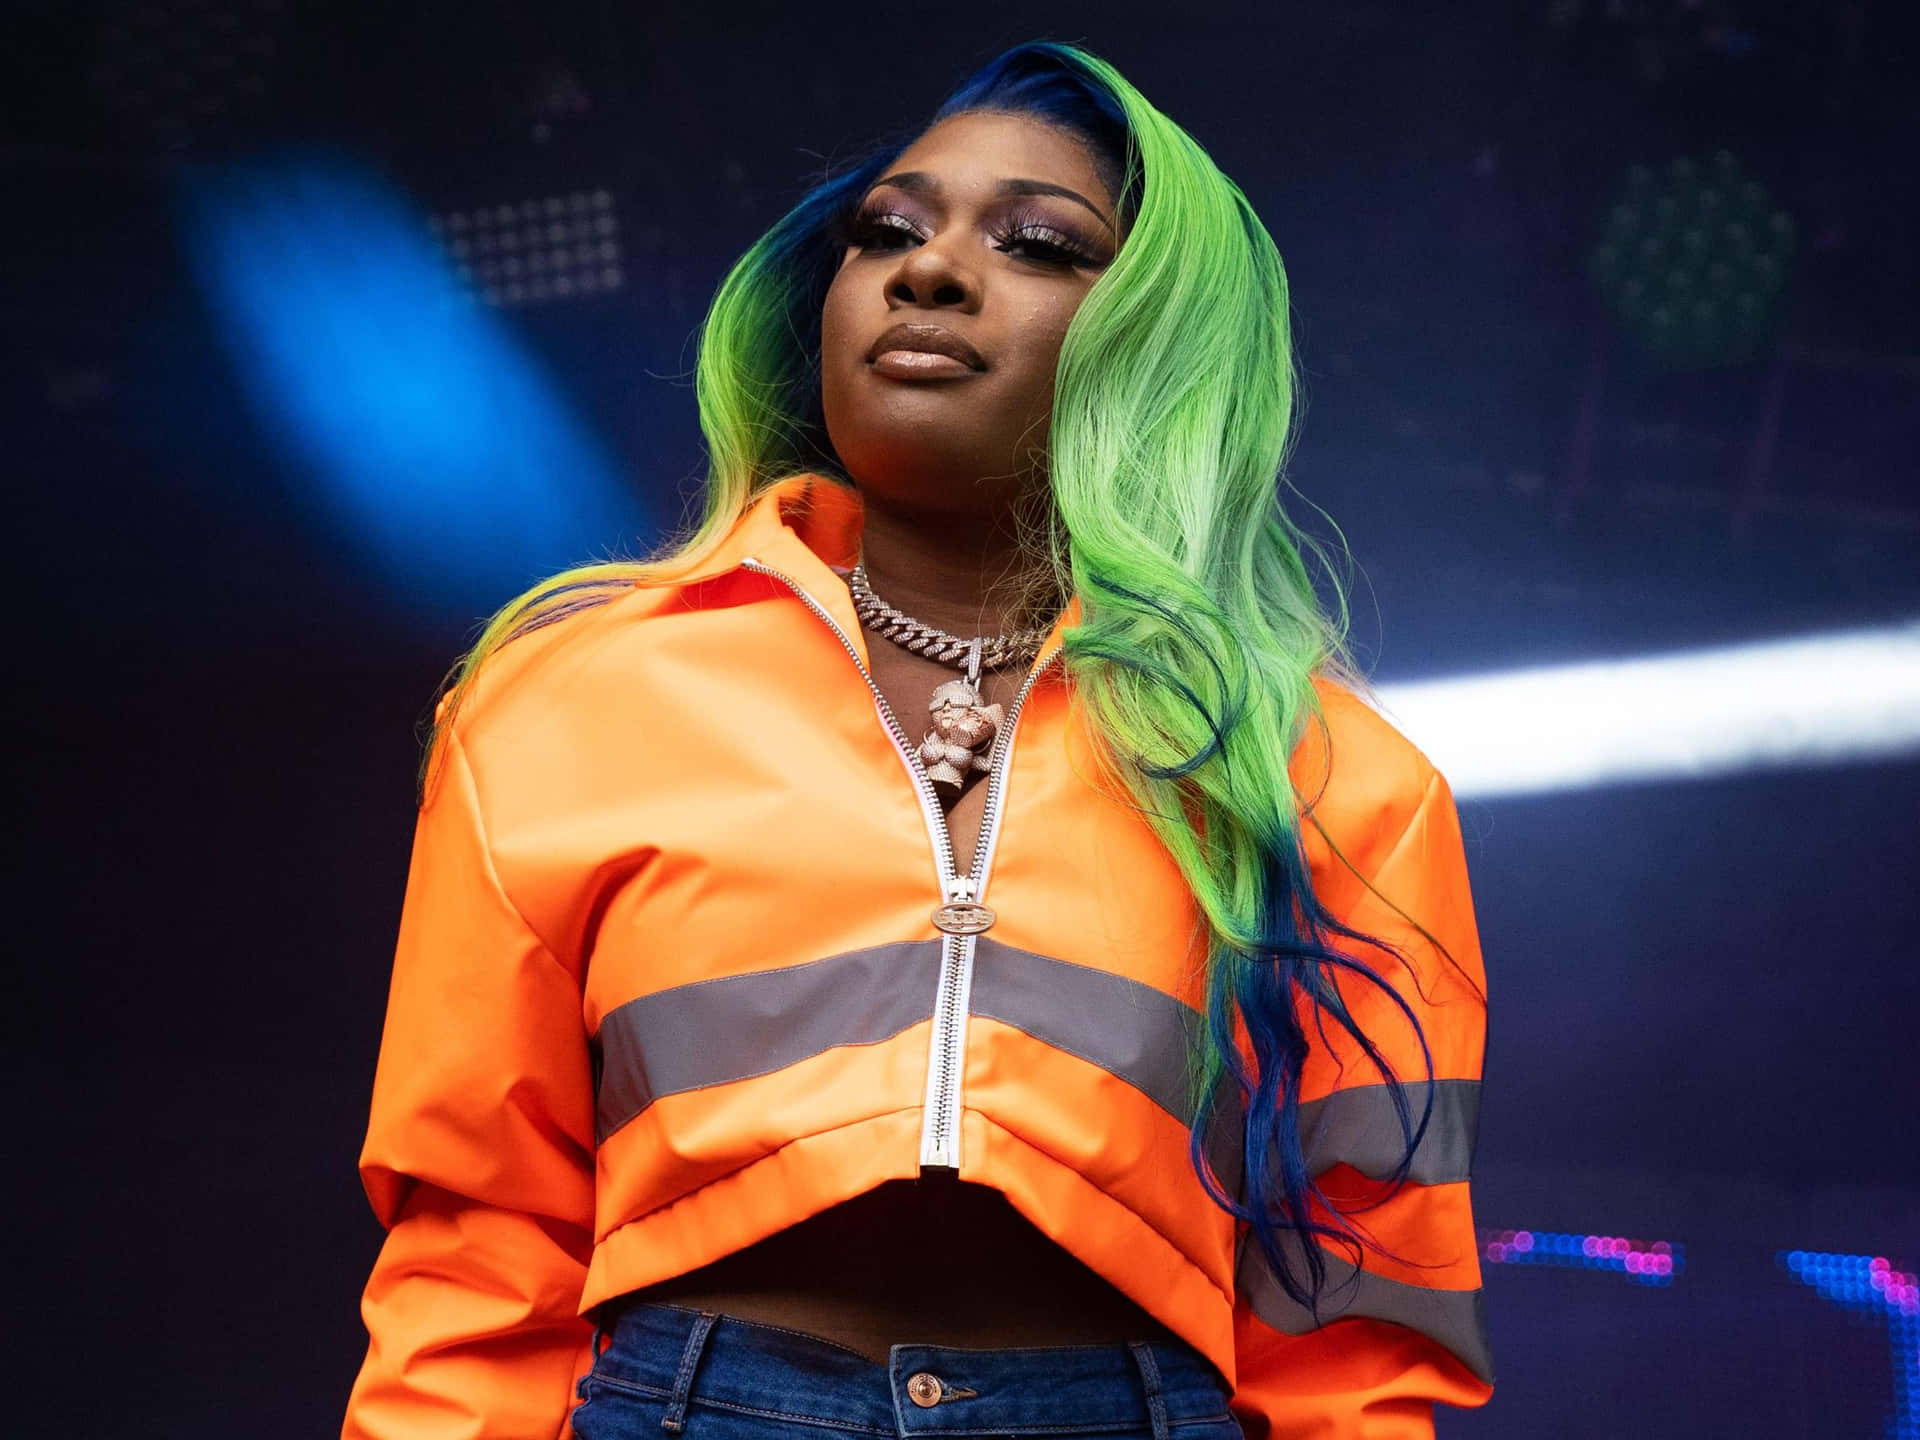 Caption: Megan Thee Stallion Glowing in a Dazzling Outfit